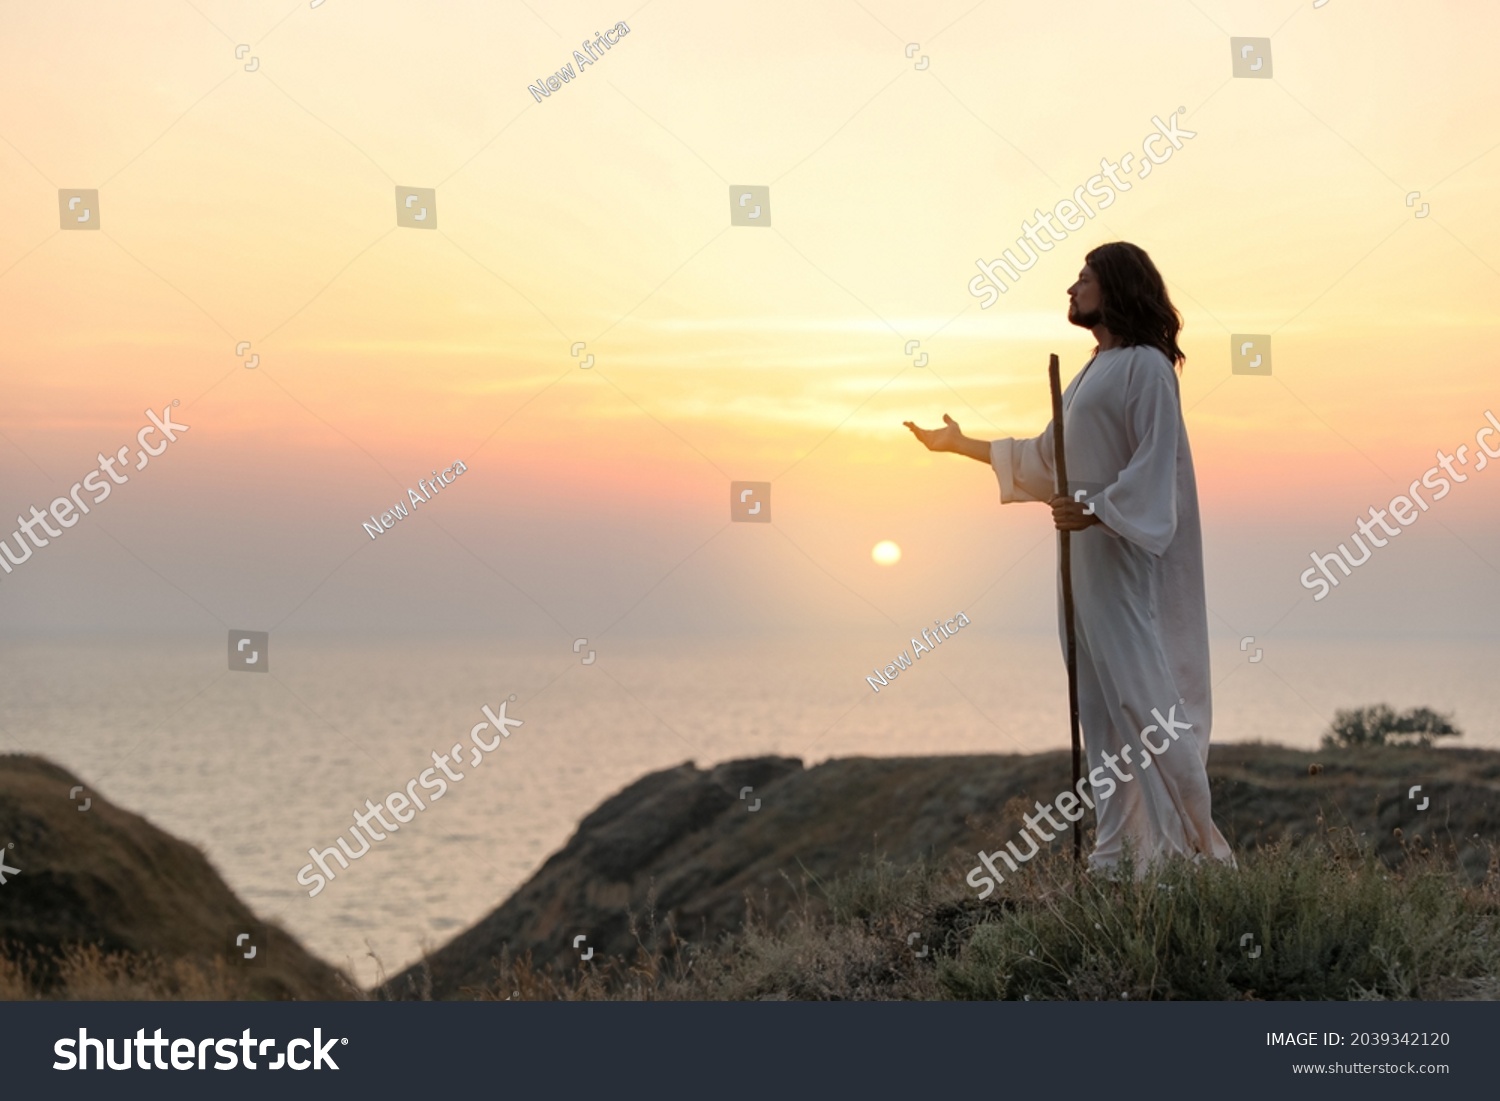 Jesus Christ on hills at sunset. Space for text #2039342120